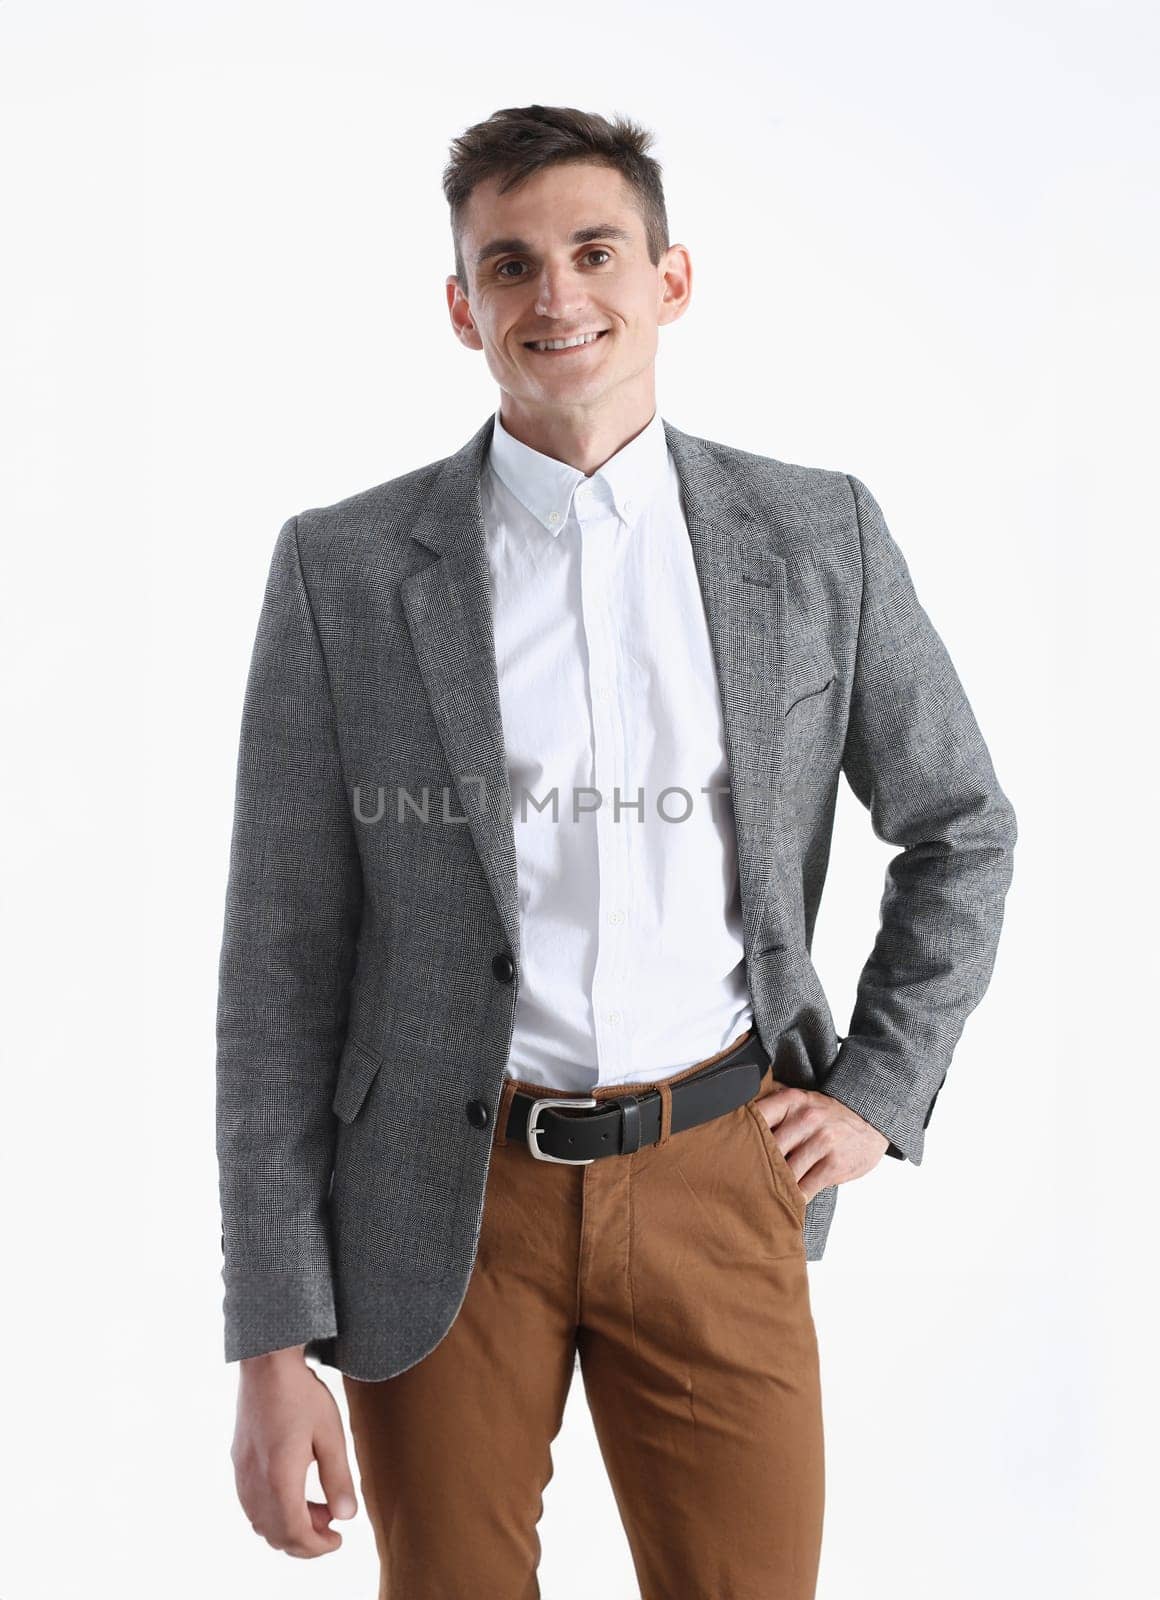 Handsome smiling man in suit and tie looking in camera portrait isolated background. White collar dress code modern office lifestyle graduate college study profession idea coach training concept